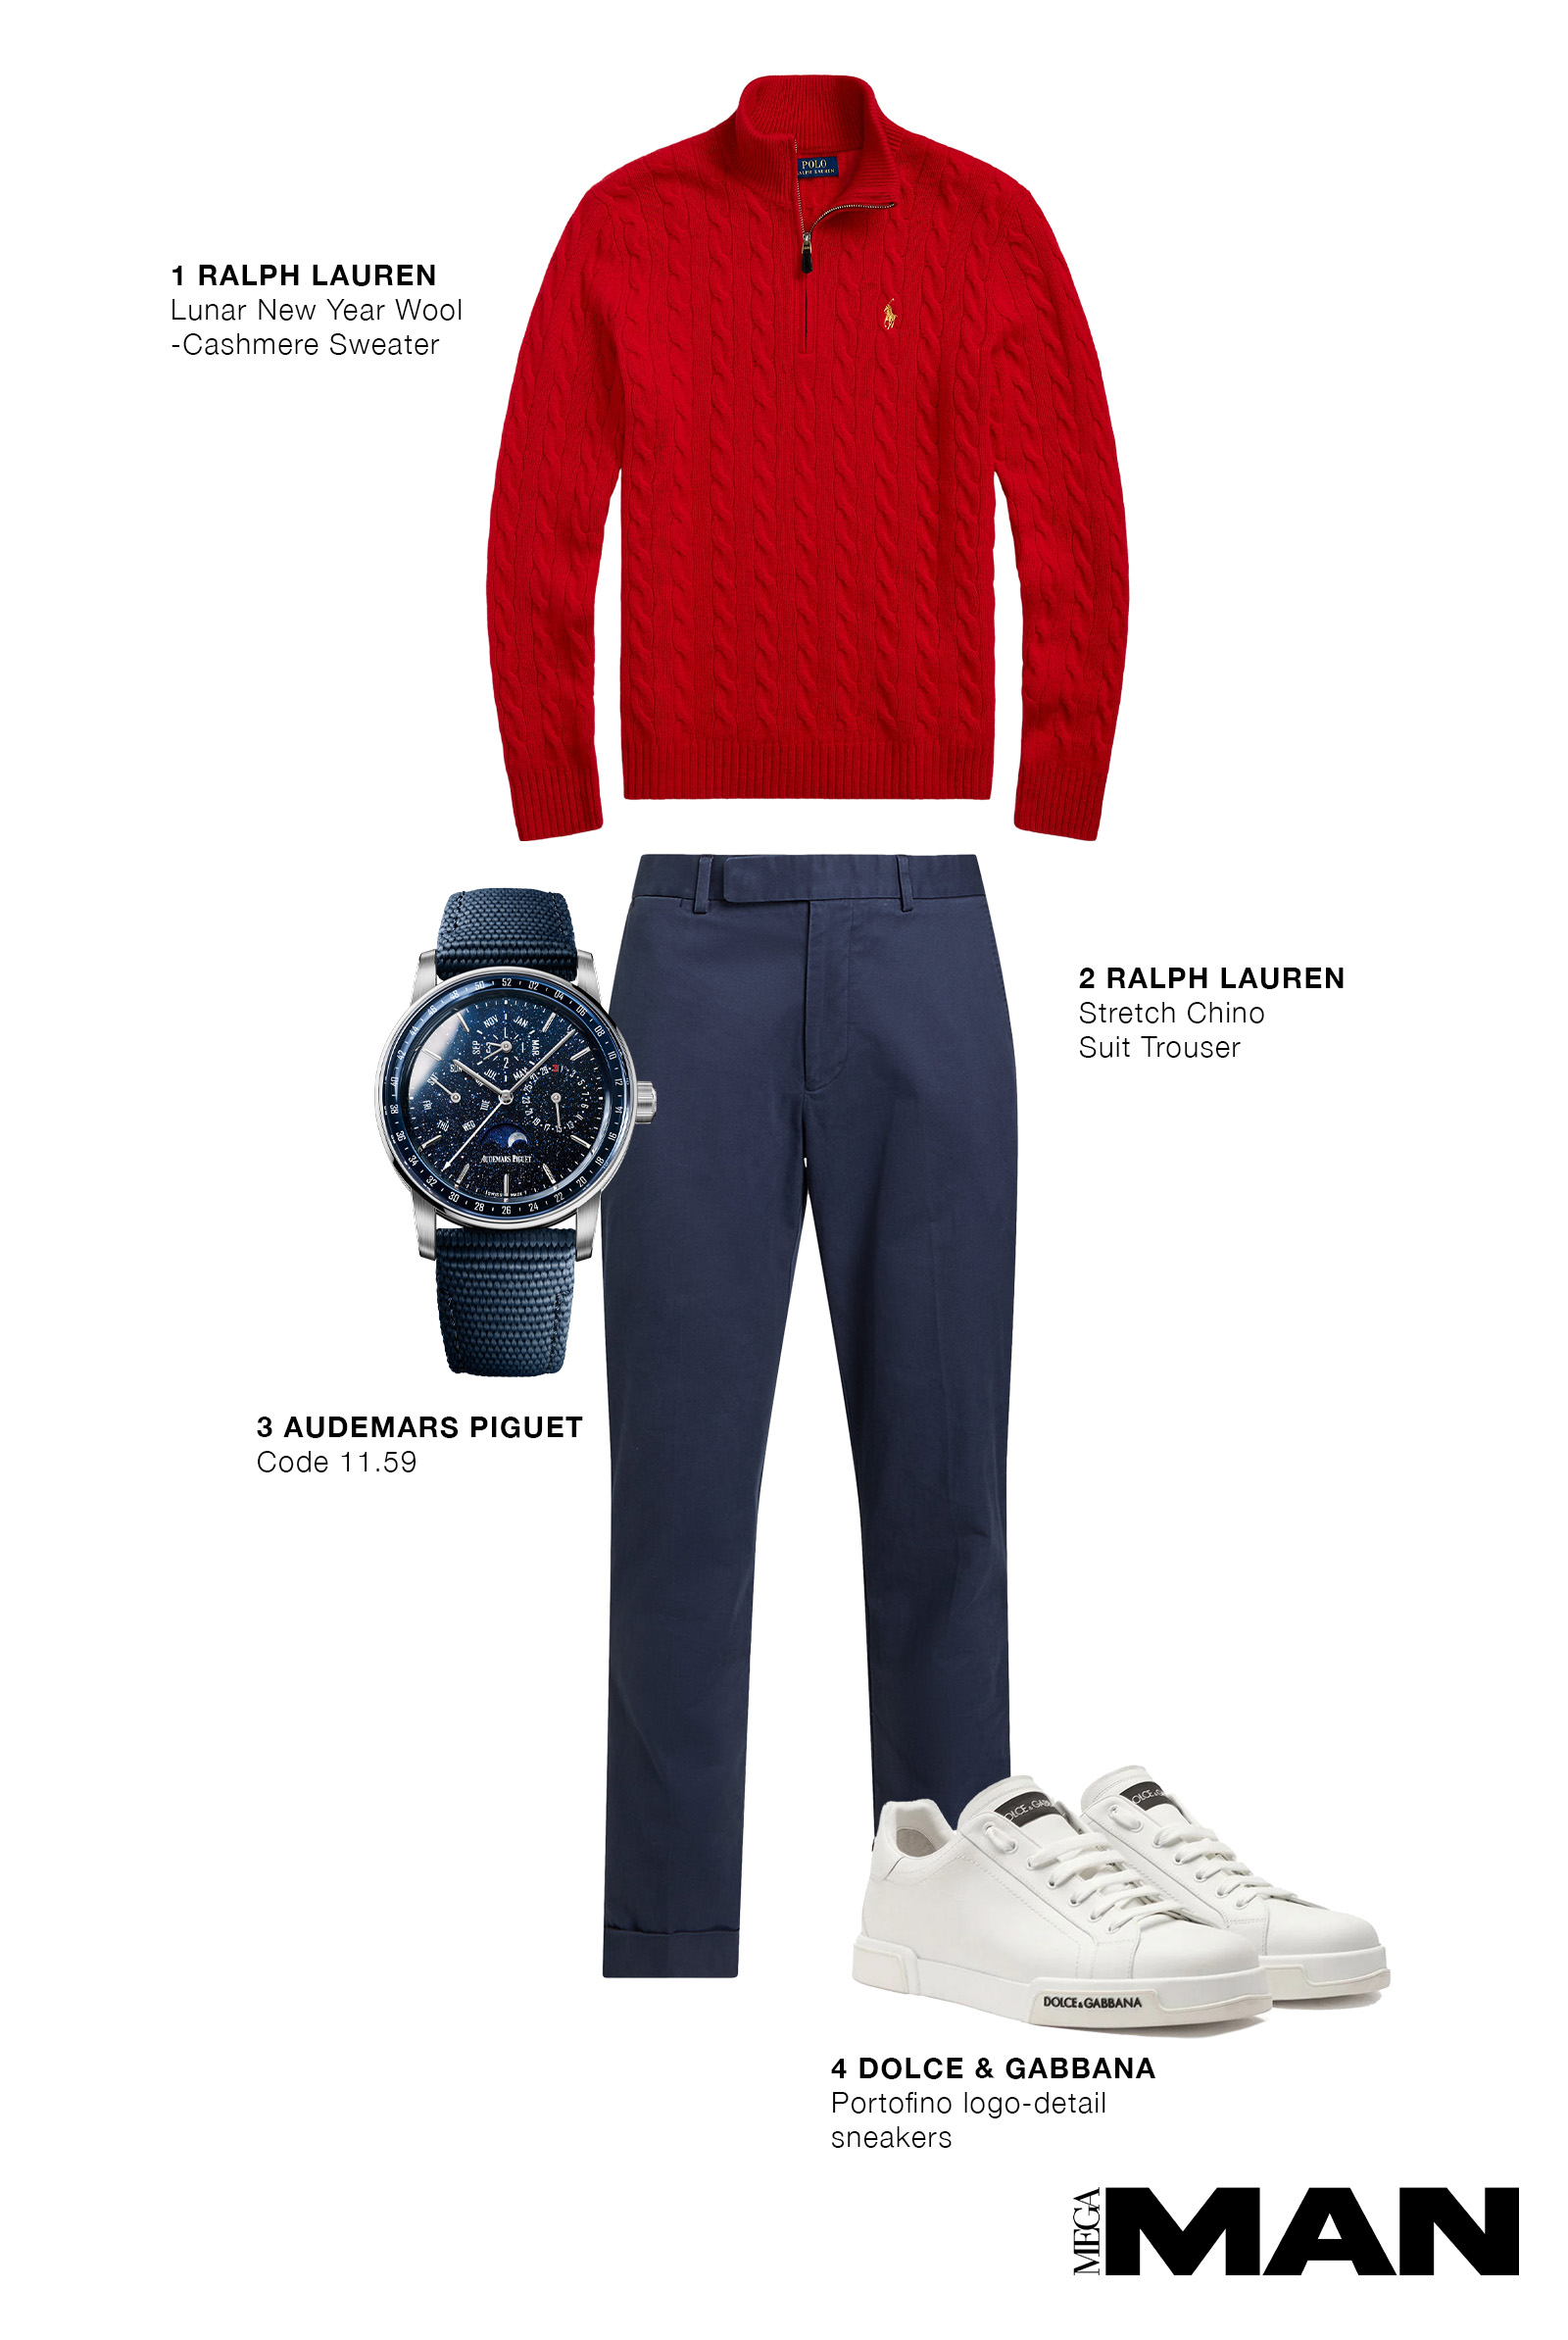 The Cheat Sheet: A Stylish Guide to Men's Holiday Outfit Color Combination - Classic Red and Navy Blue